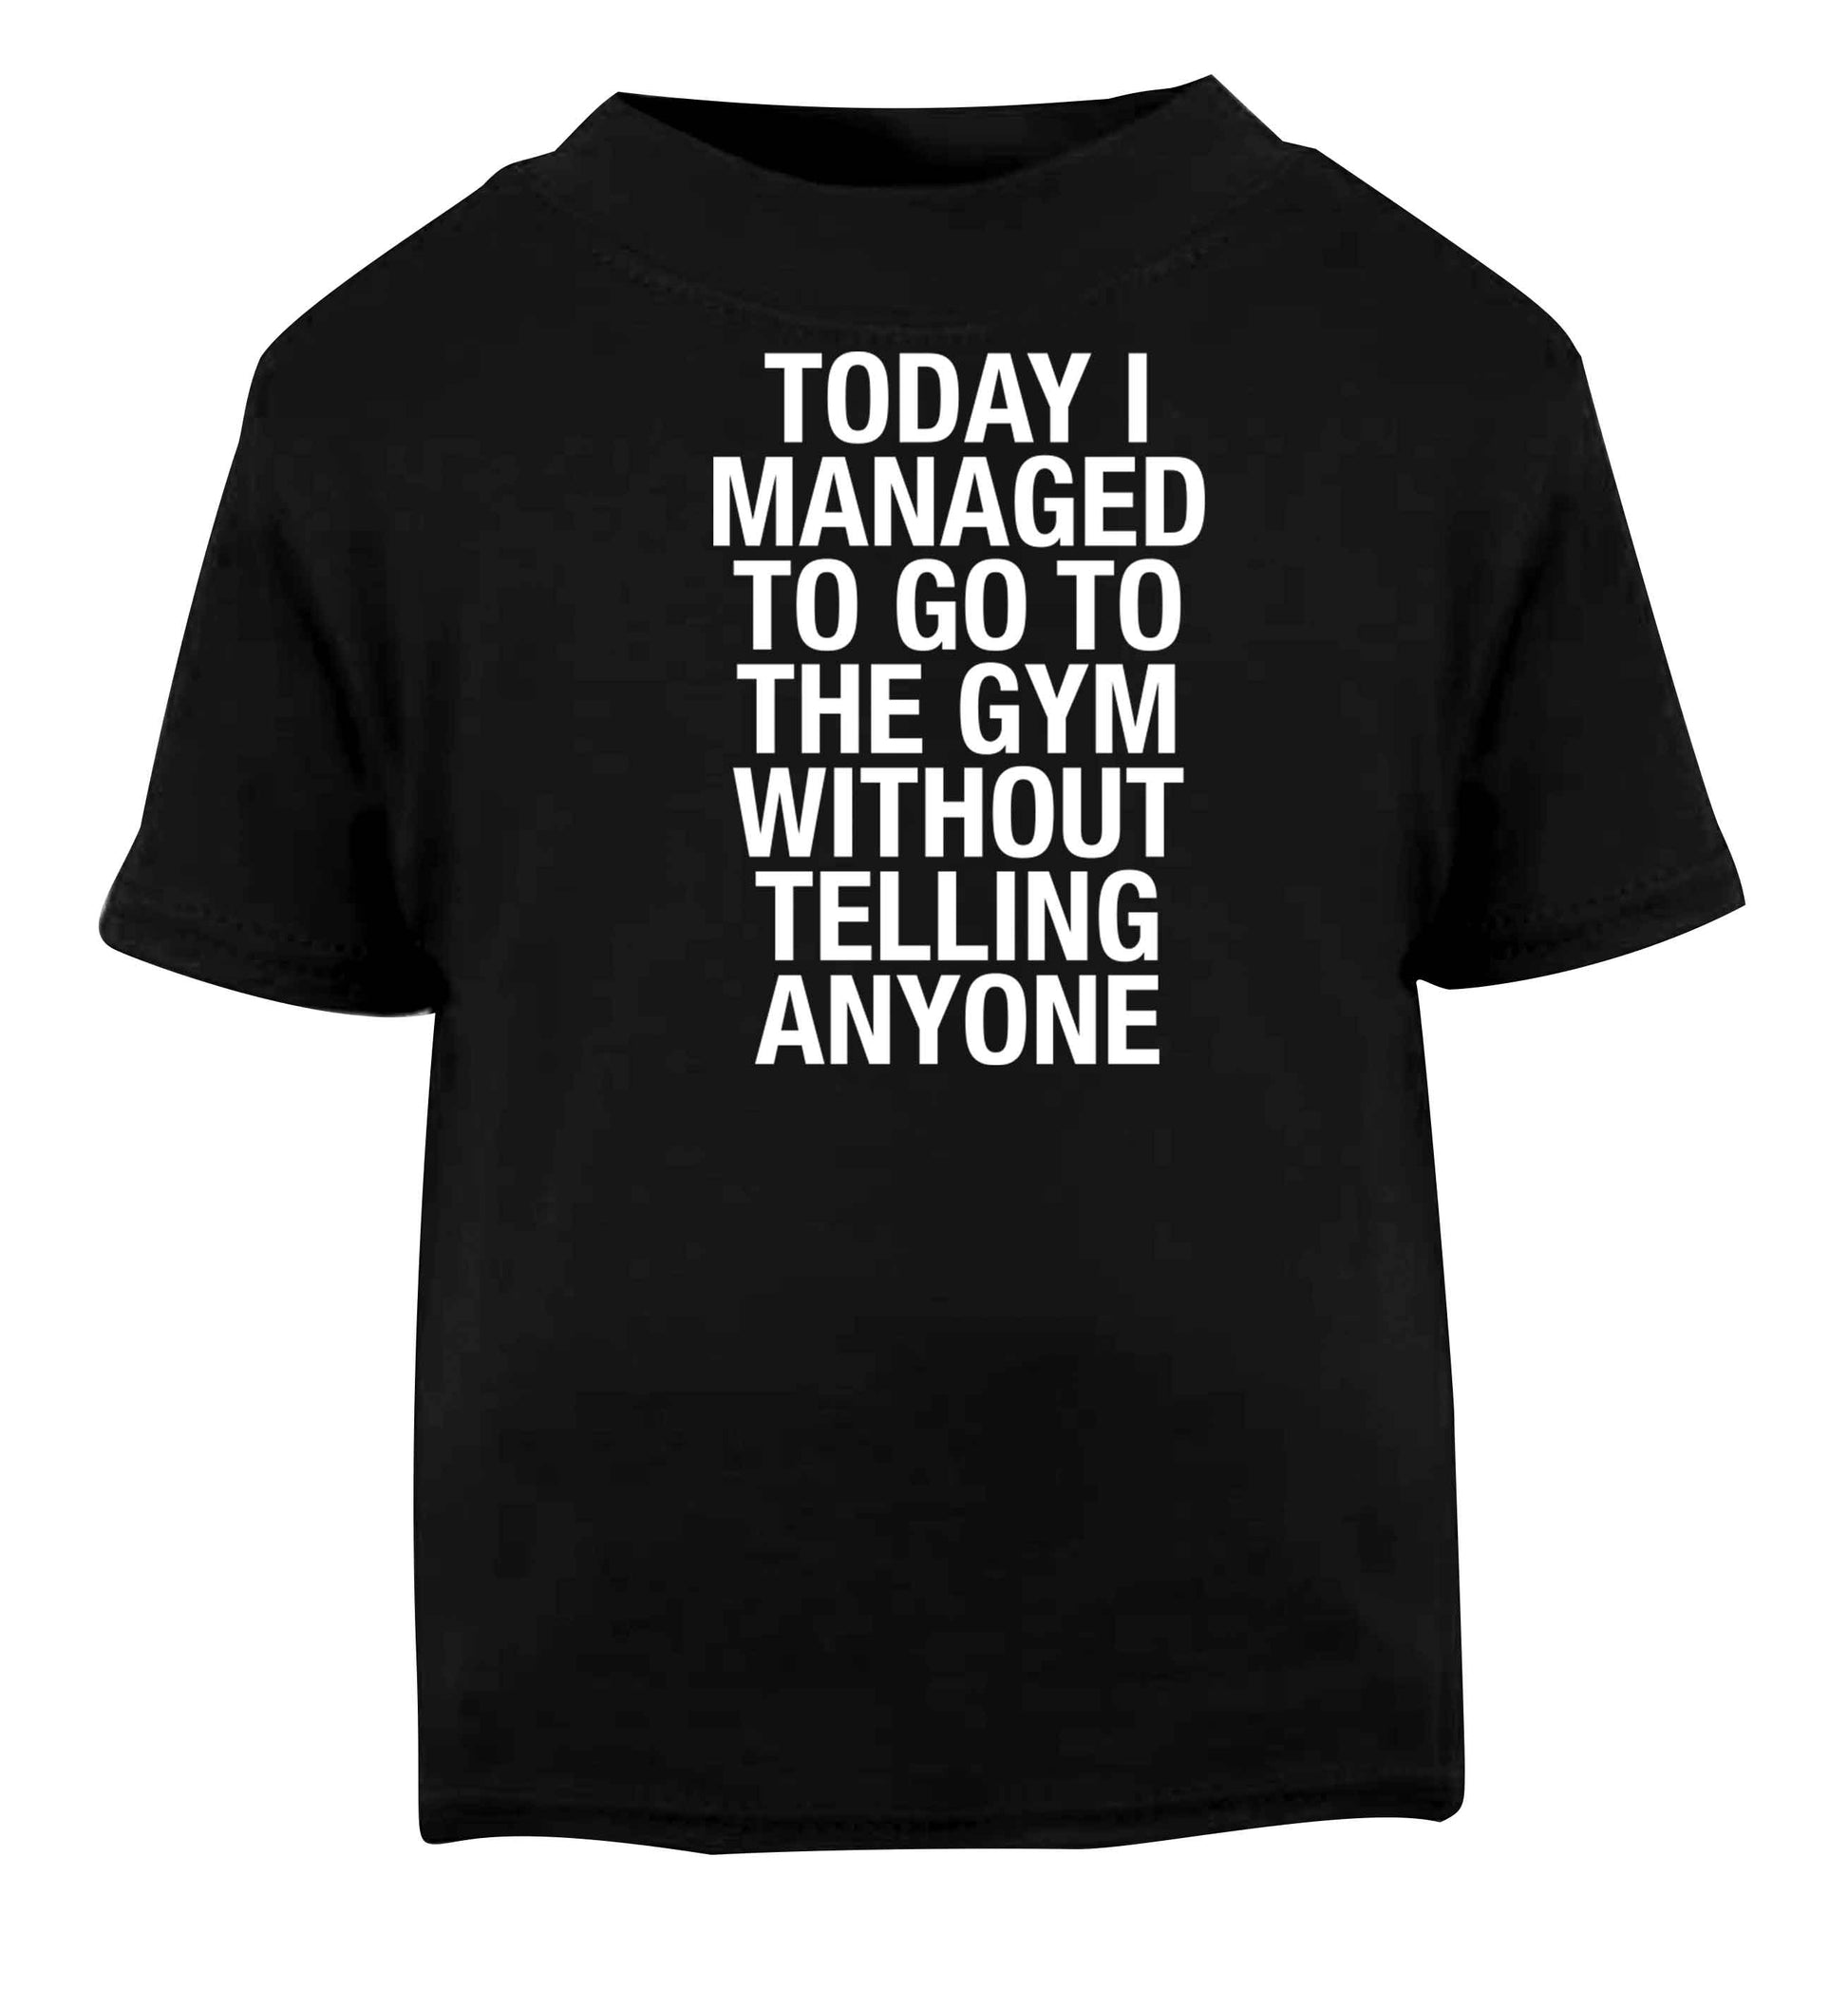 Today I managed to go to the gym without telling anyone Black baby toddler Tshirt 2 years